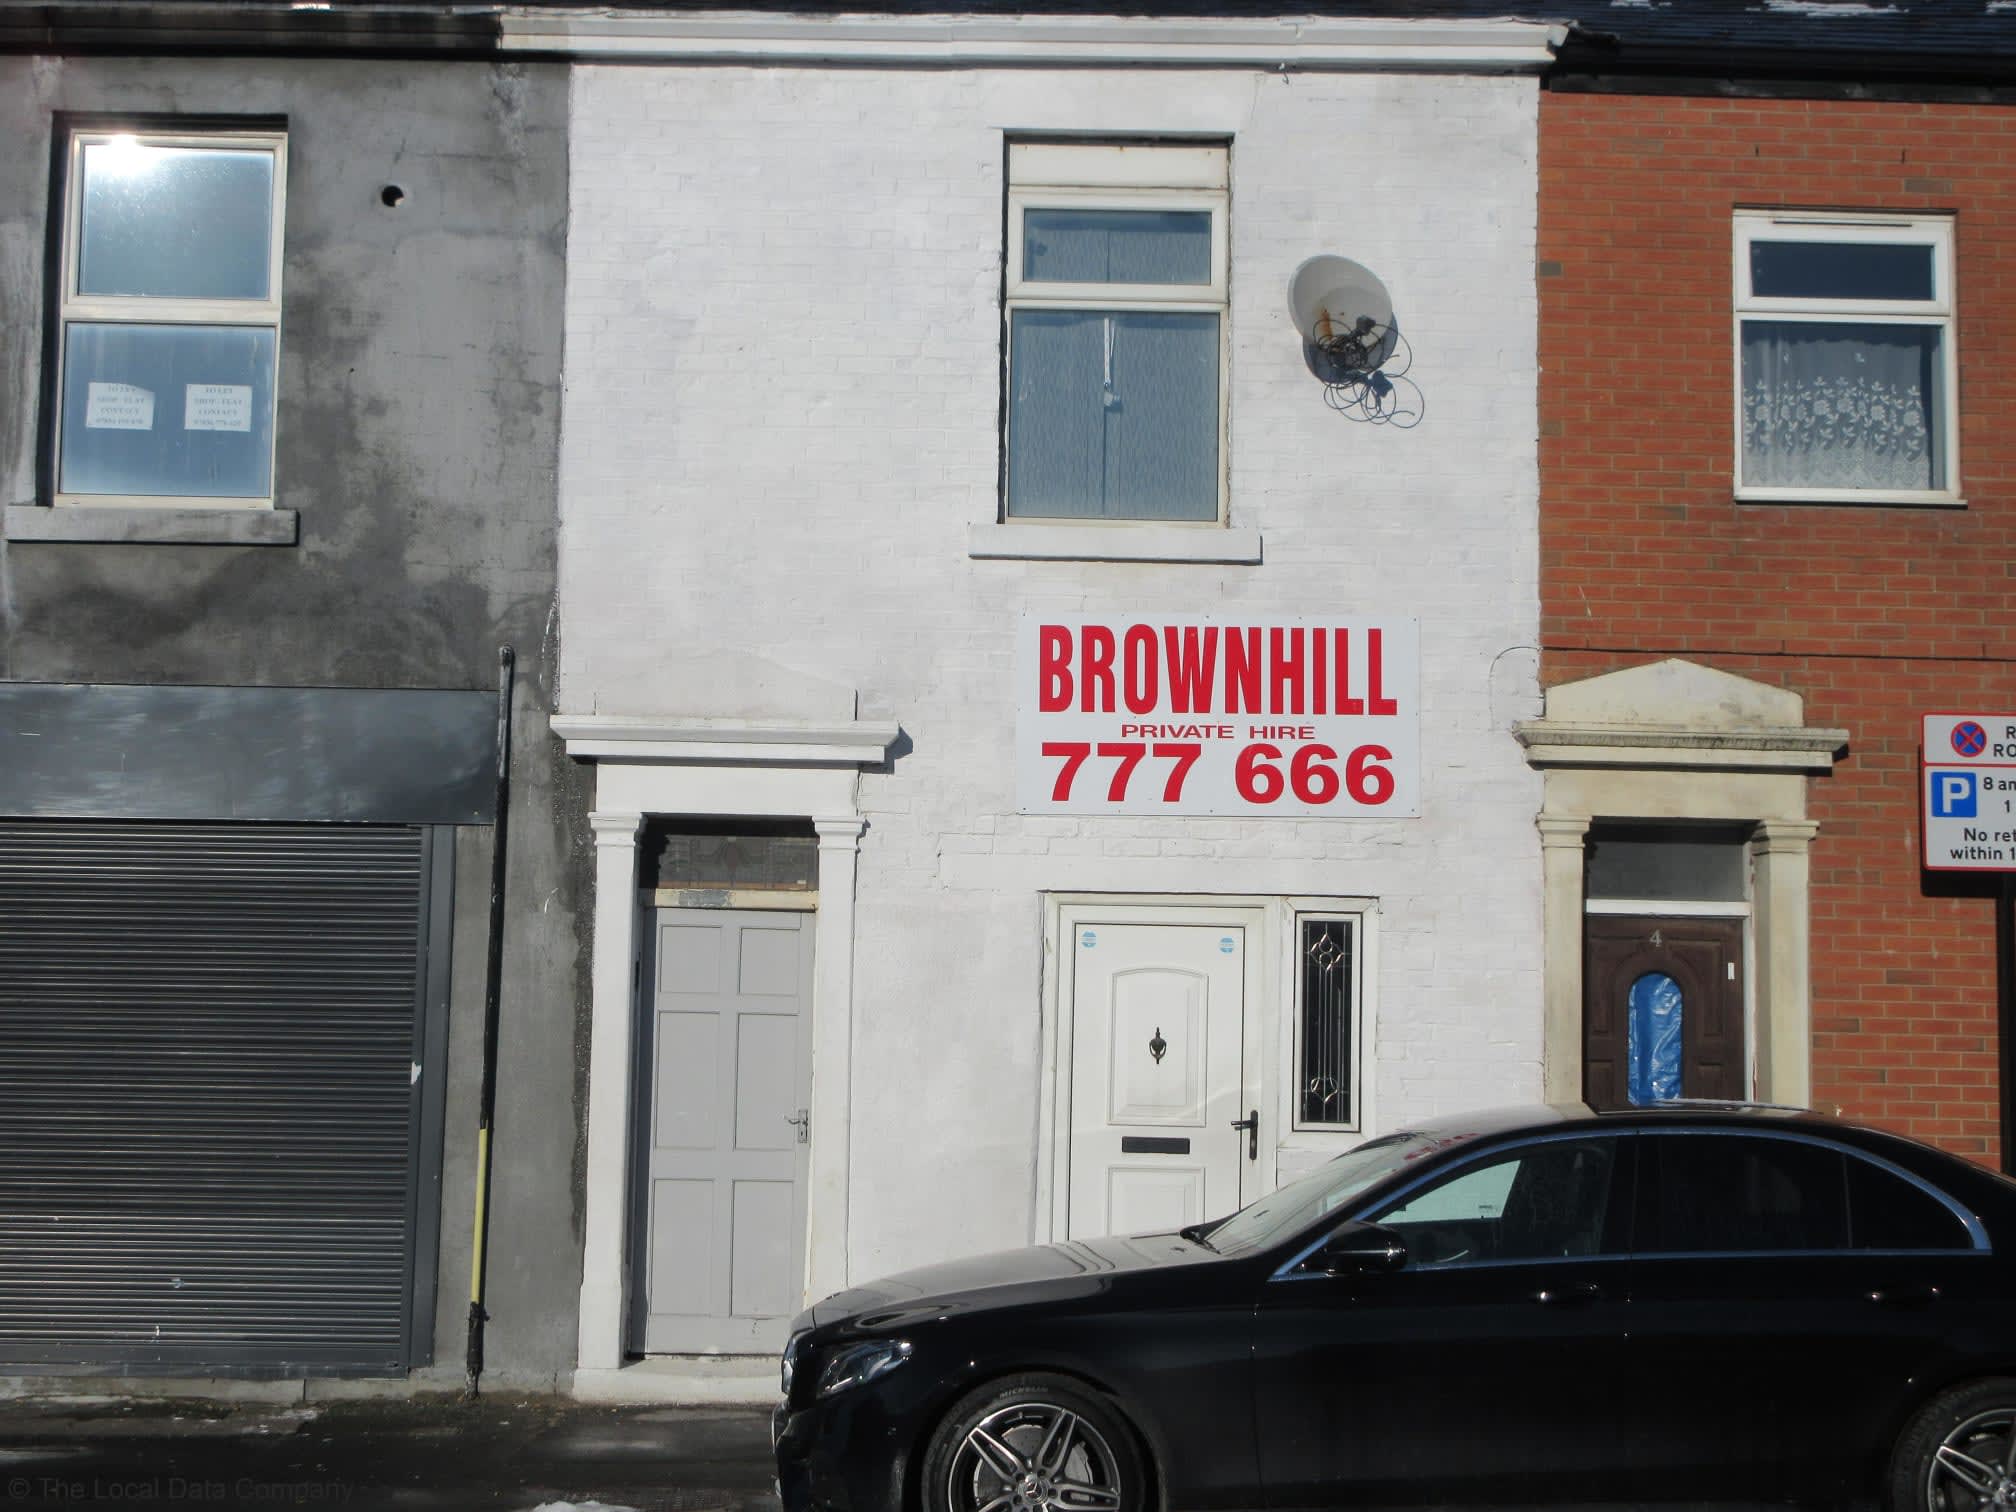 Images Brownhill Corporate Hire